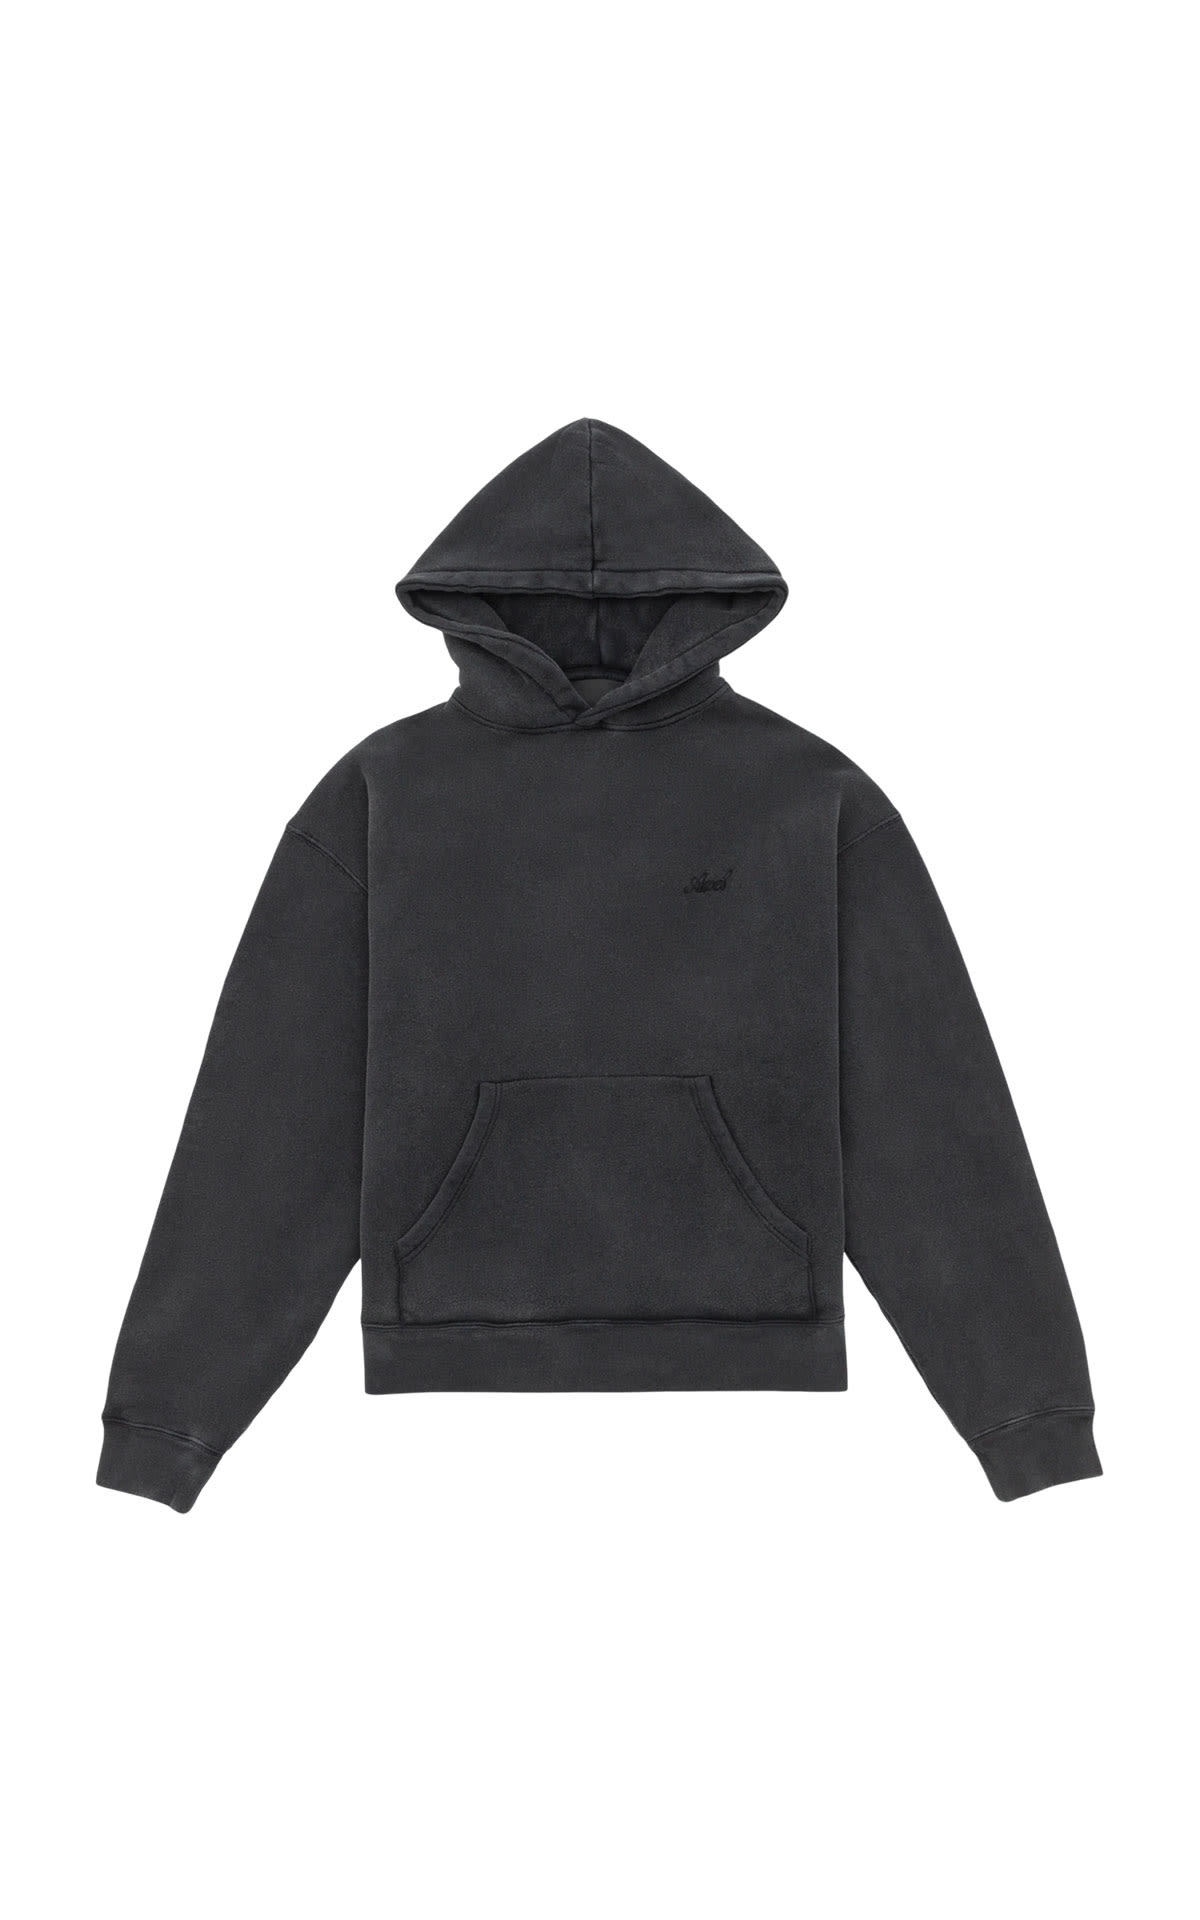 Axel Arigato Relax hoodie black mens from Bicester Village